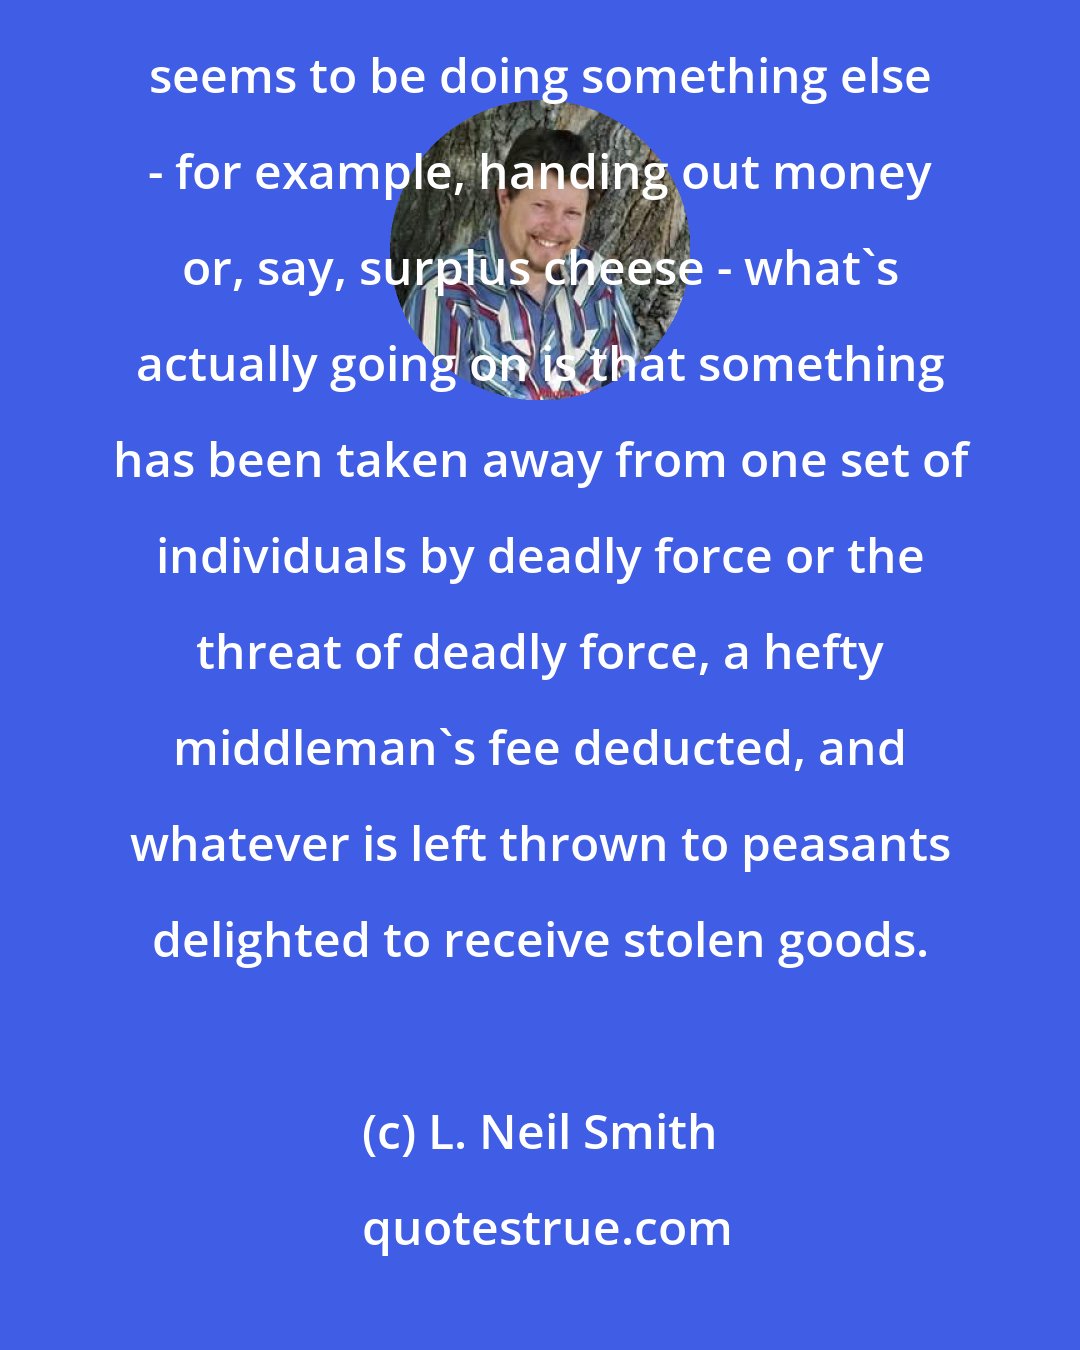 L. Neil Smith: Government can only do two things: It can beat people up and kill them. Or it can threaten to do so. When it seems to be doing something else - for example, handing out money or, say, surplus cheese - what's actually going on is that something has been taken away from one set of individuals by deadly force or the threat of deadly force, a hefty middleman's fee deducted, and whatever is left thrown to peasants delighted to receive stolen goods.